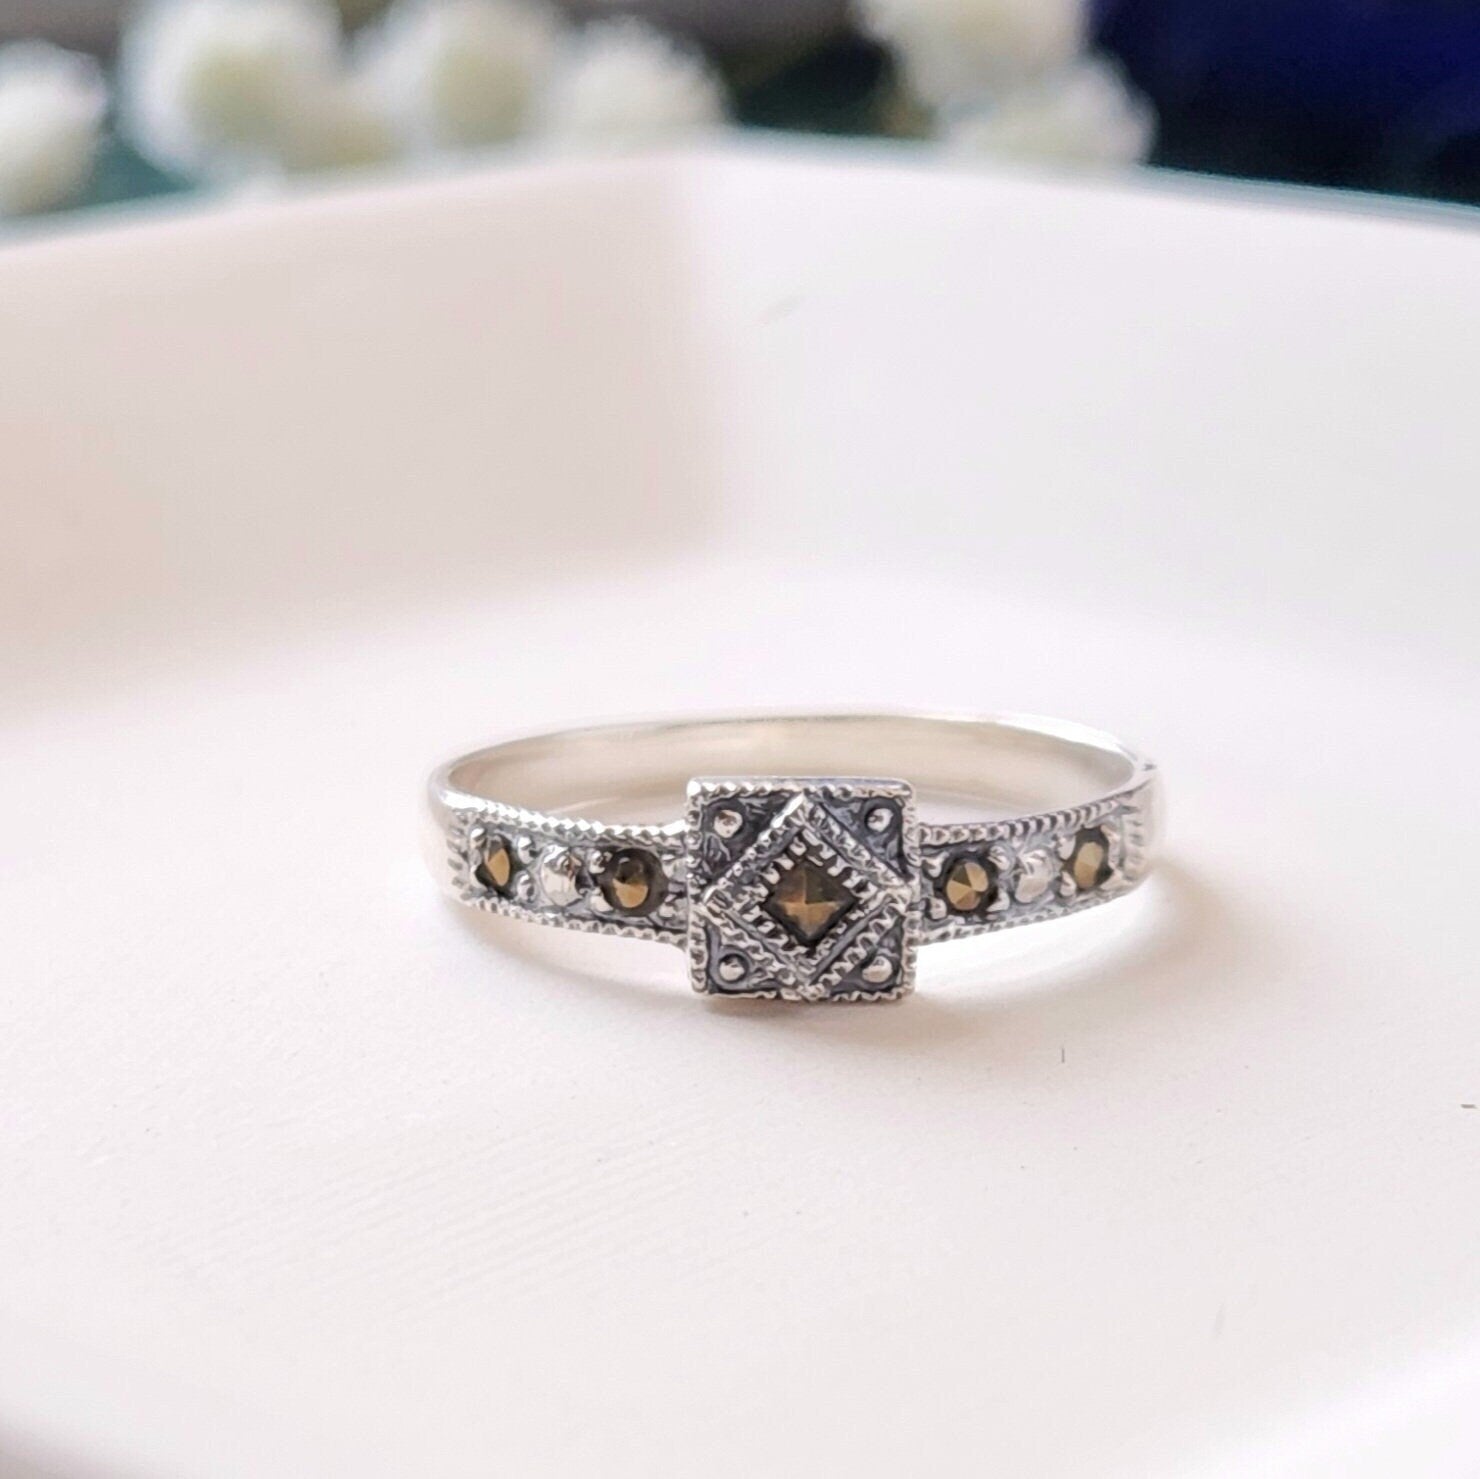 Vintage Marcasite Ring 001-651-00163 - $500 or Less | Joint Venture Jewelry  | Cary, NC